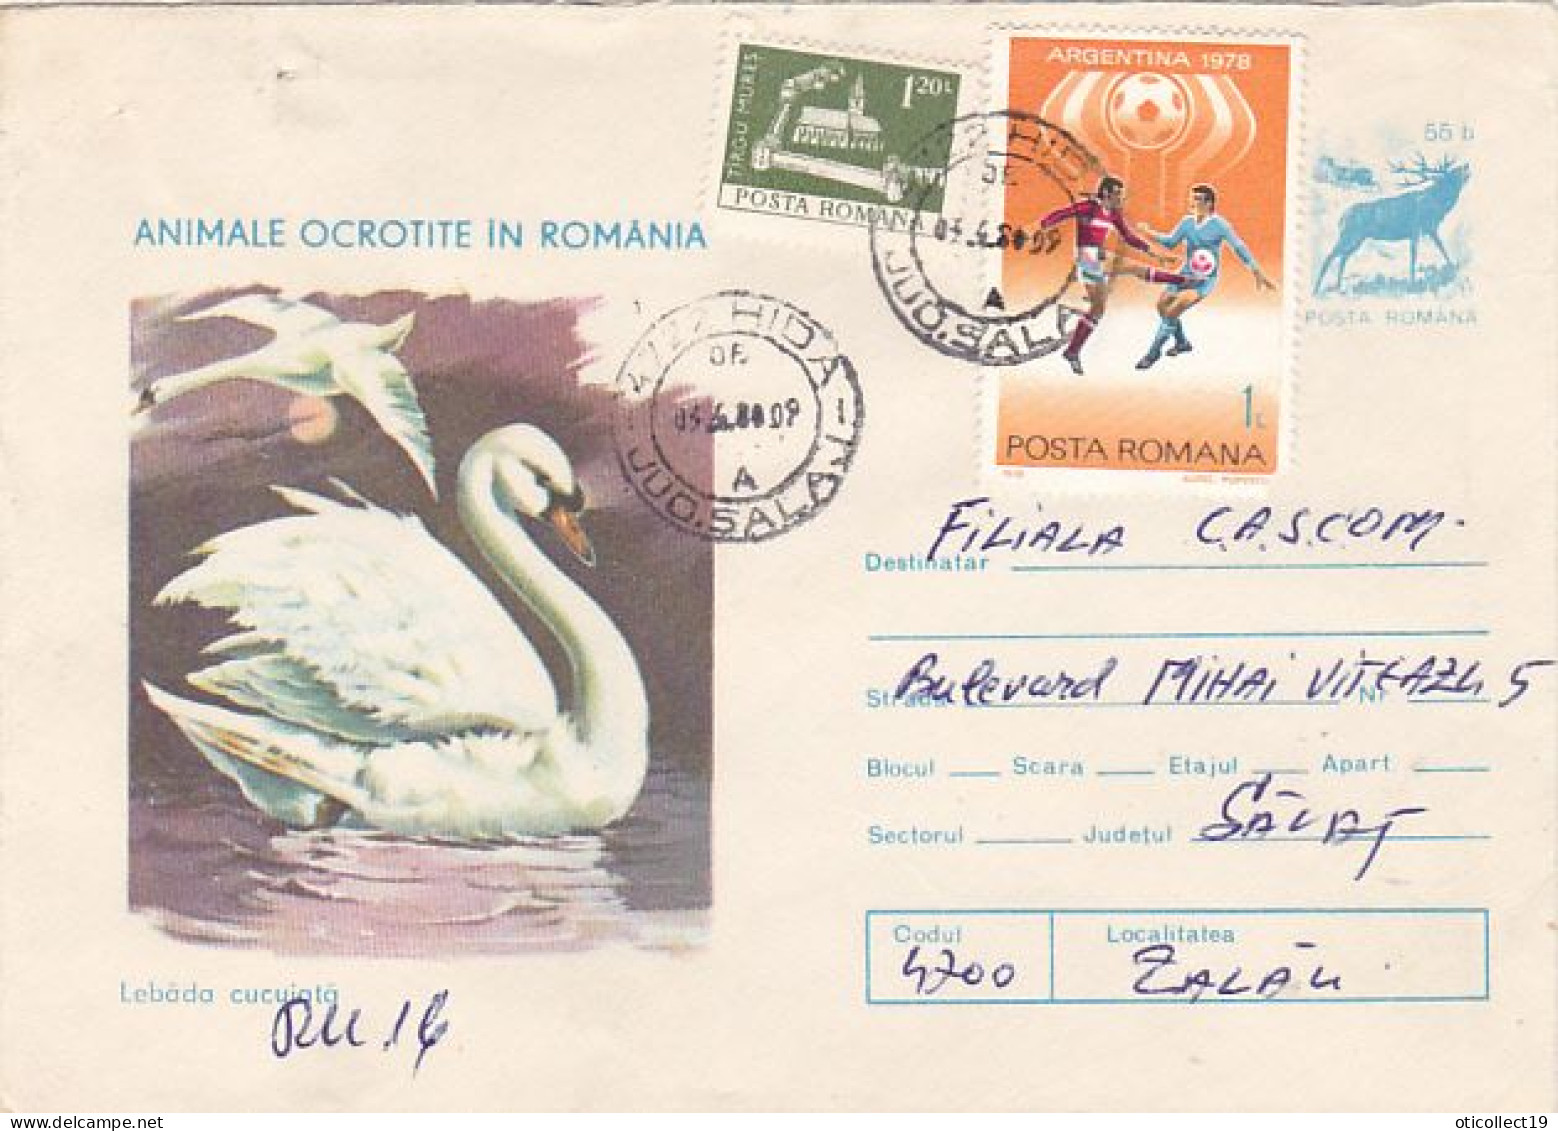 ANIMALS, BIRDS, MUTE SWAN, REGISTERED COVER STATIONERY, FINE STAMPS, 1977, ROMANIA - Cigni